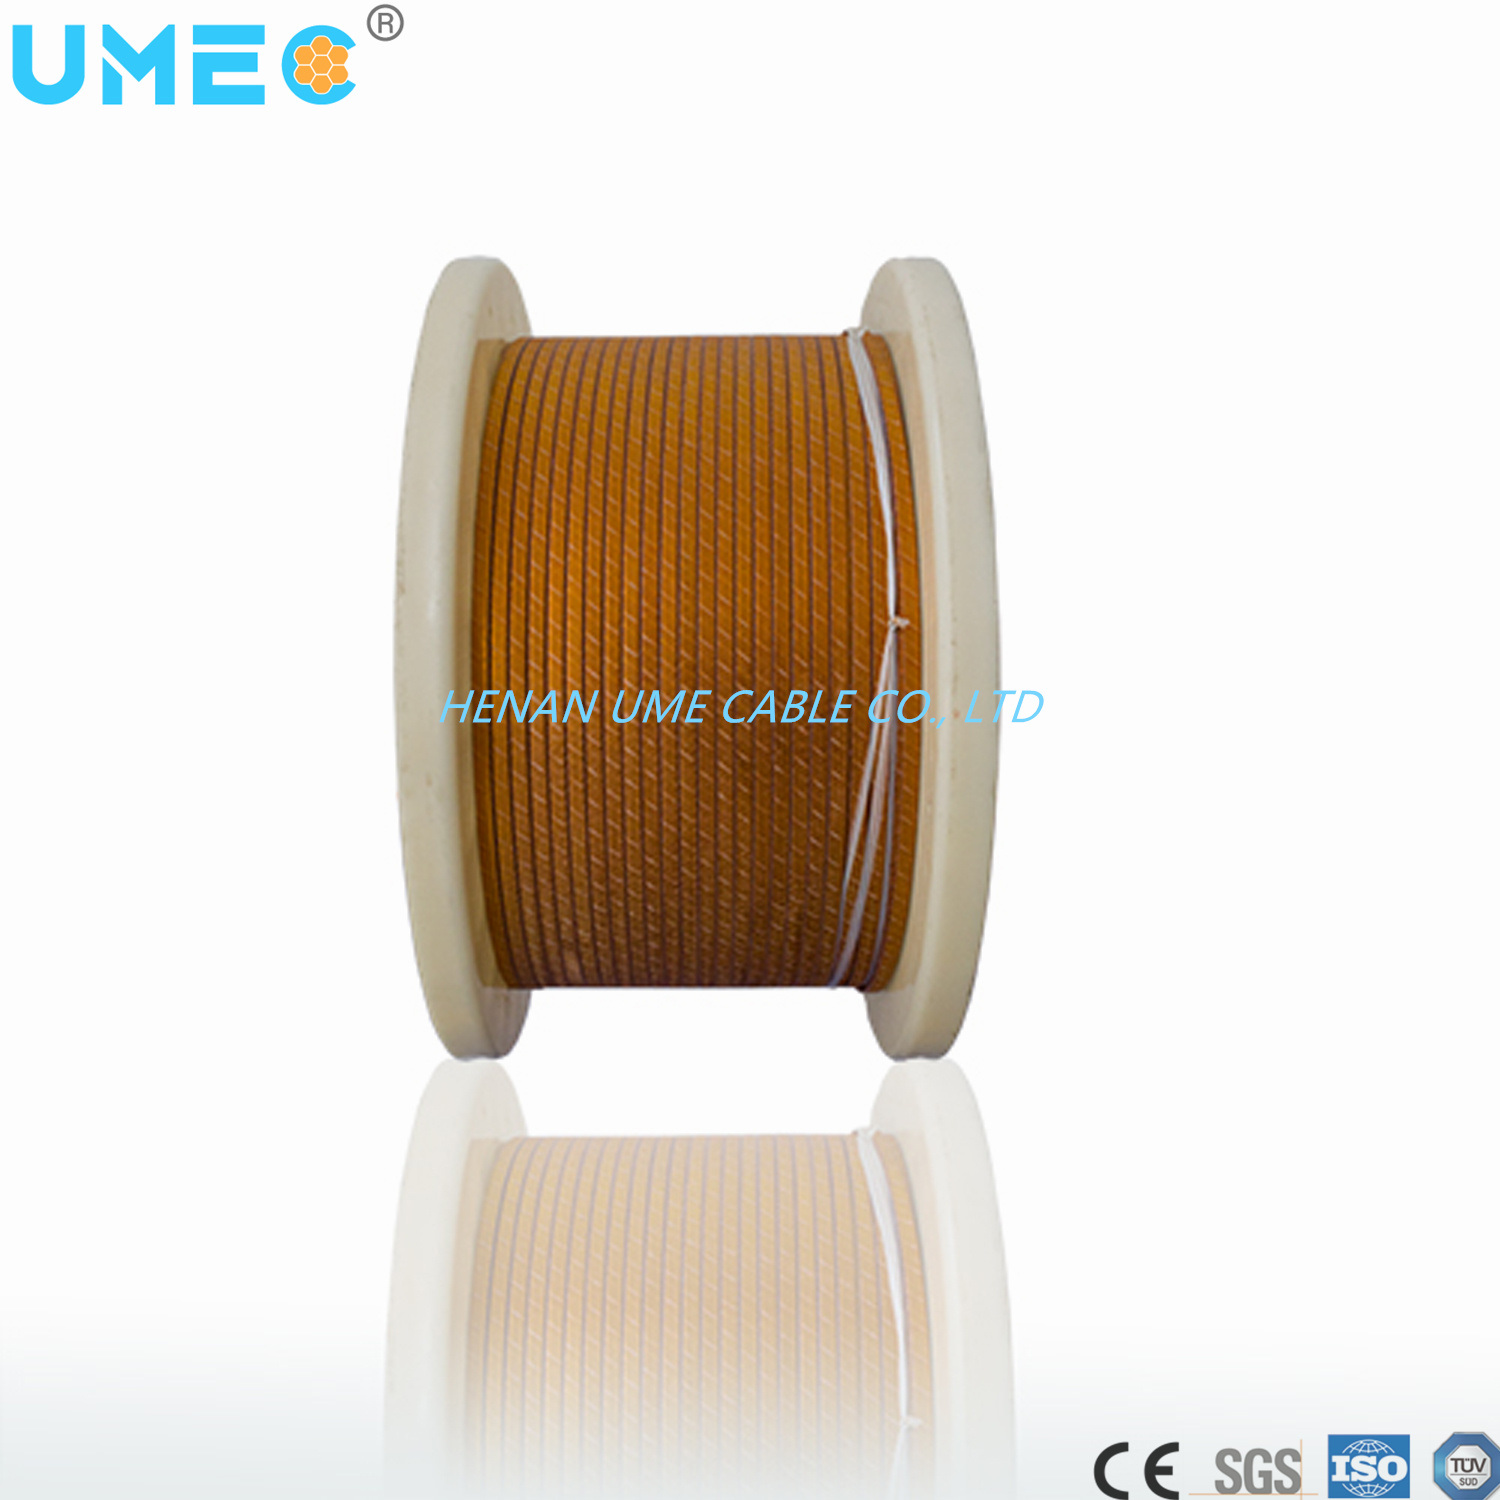 Self-Adhesive Fibreglass and Mica Tape Wrapped Flat Copper Wire